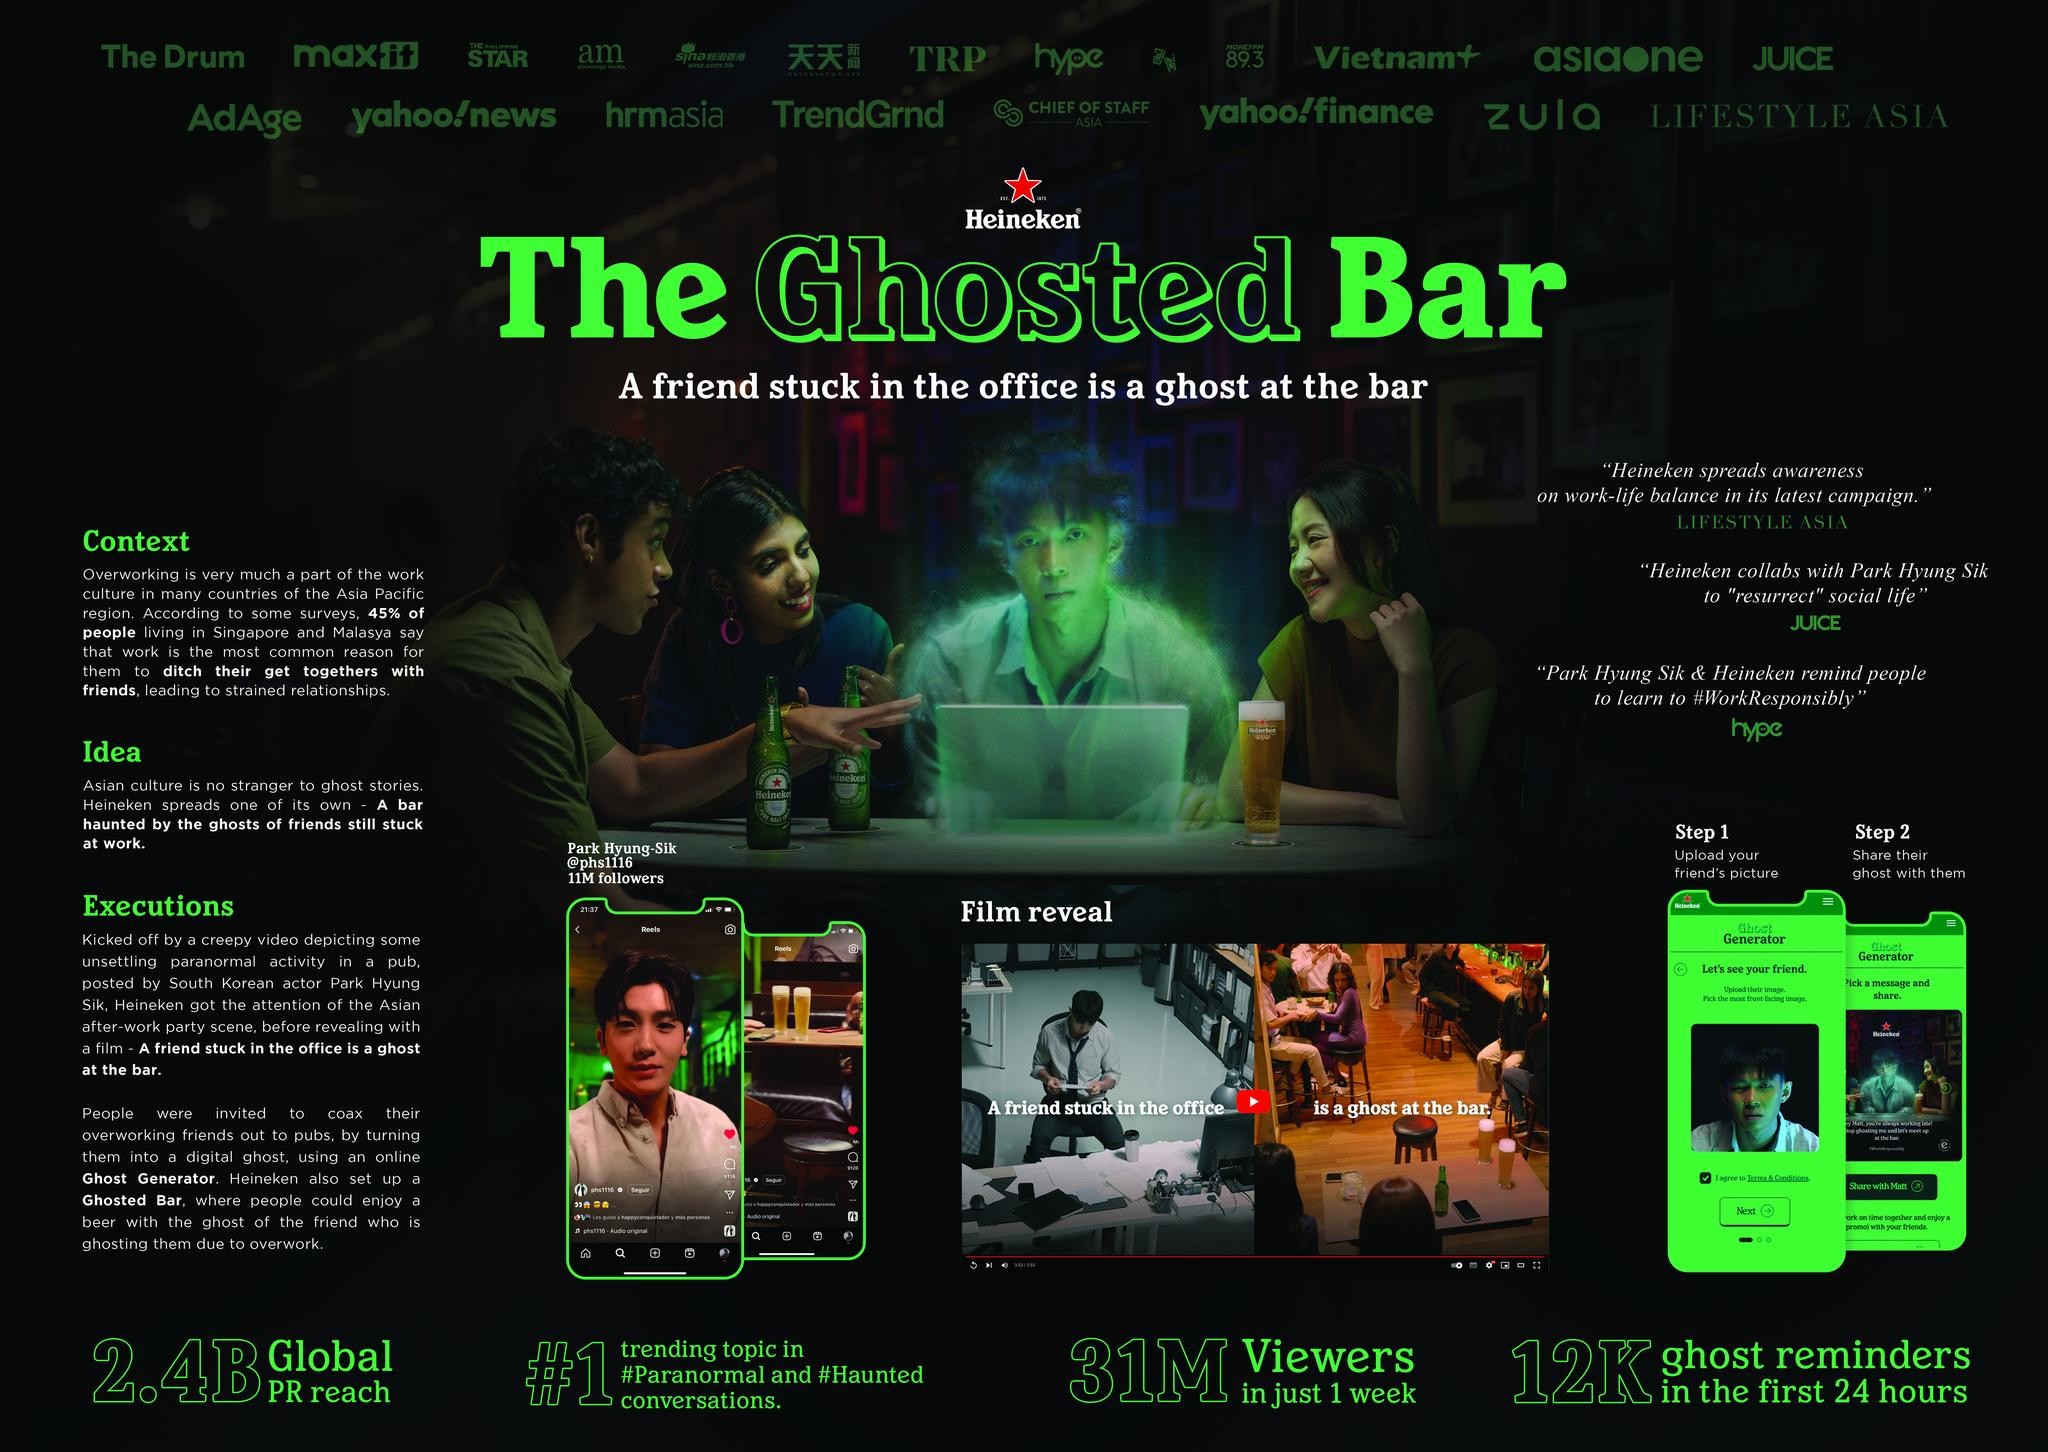 The Ghosted Bar